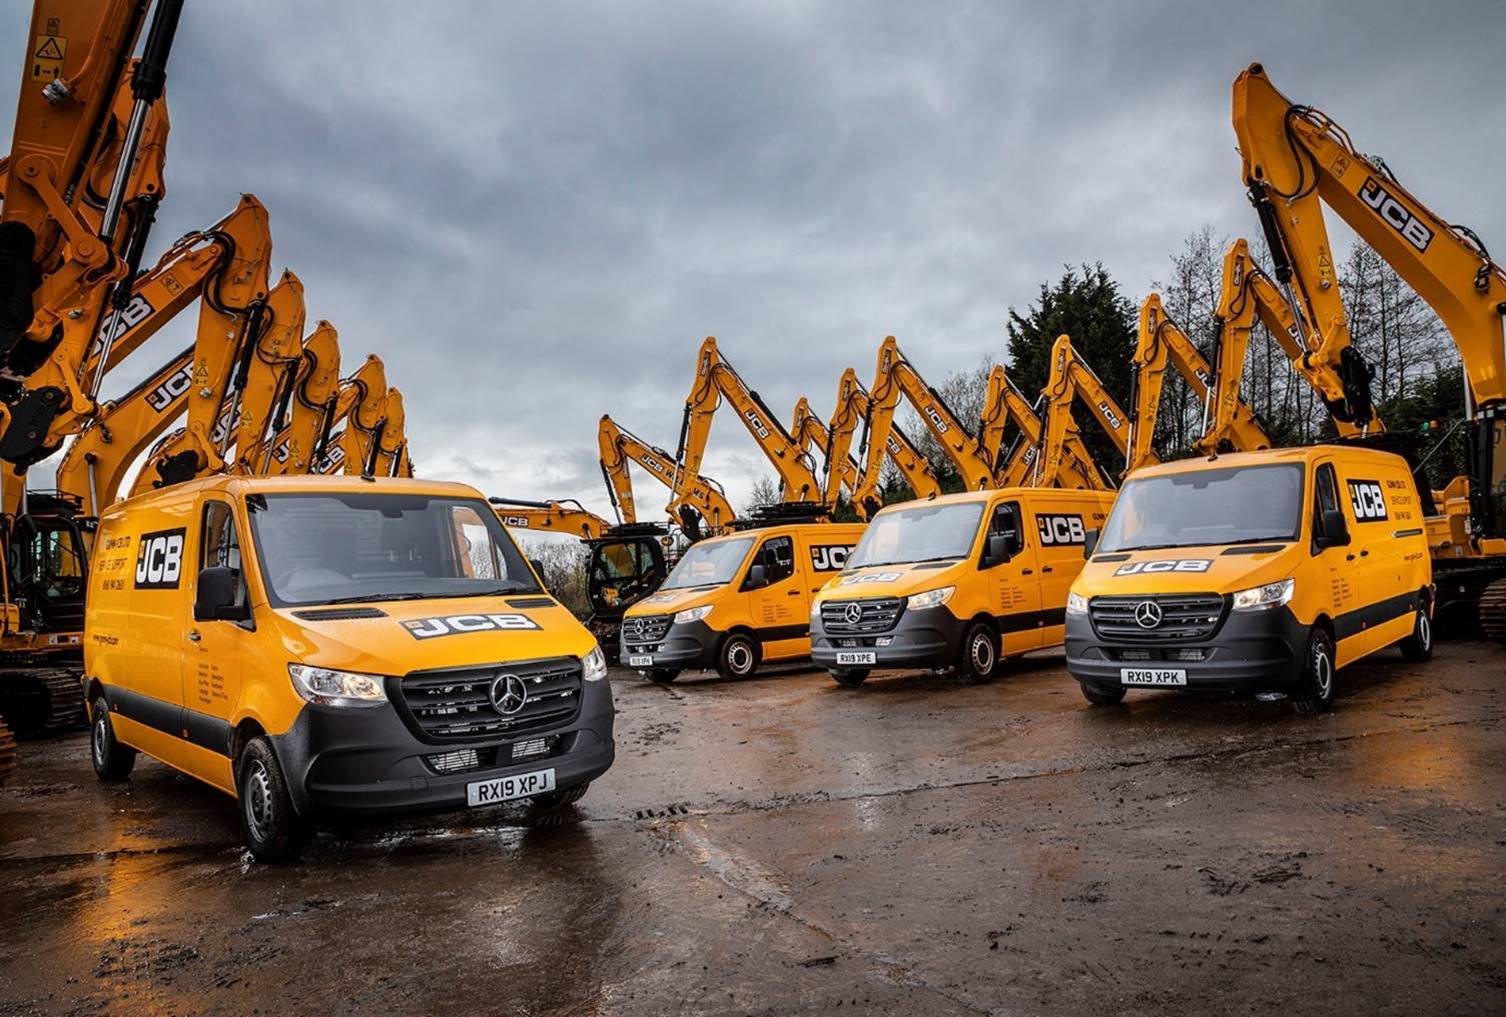 Gunn JCB shoots for the three pointed stars after turning to Rossetts for Mercedes-Benz sprinter